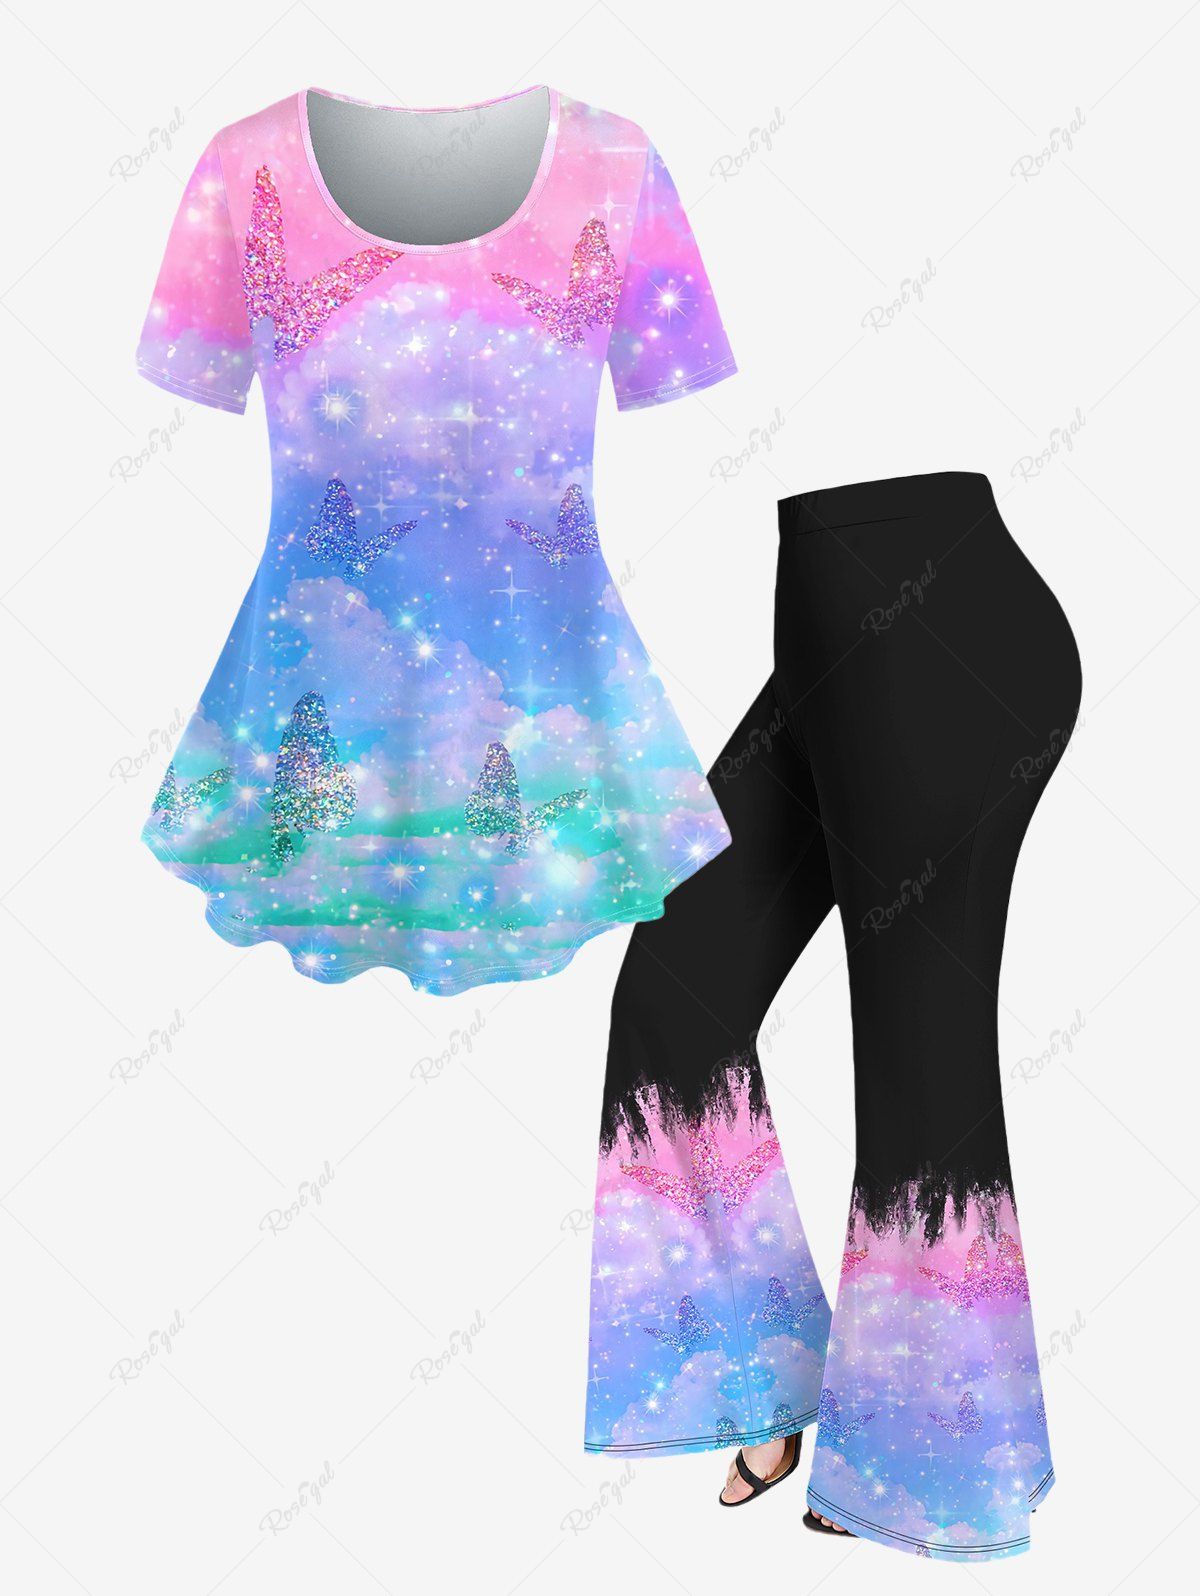 Hot Plus Size Colorful Butterfly Sparkling Printed Short Sleeves T-shirt and Flare Pants 70s 80s Outfit  